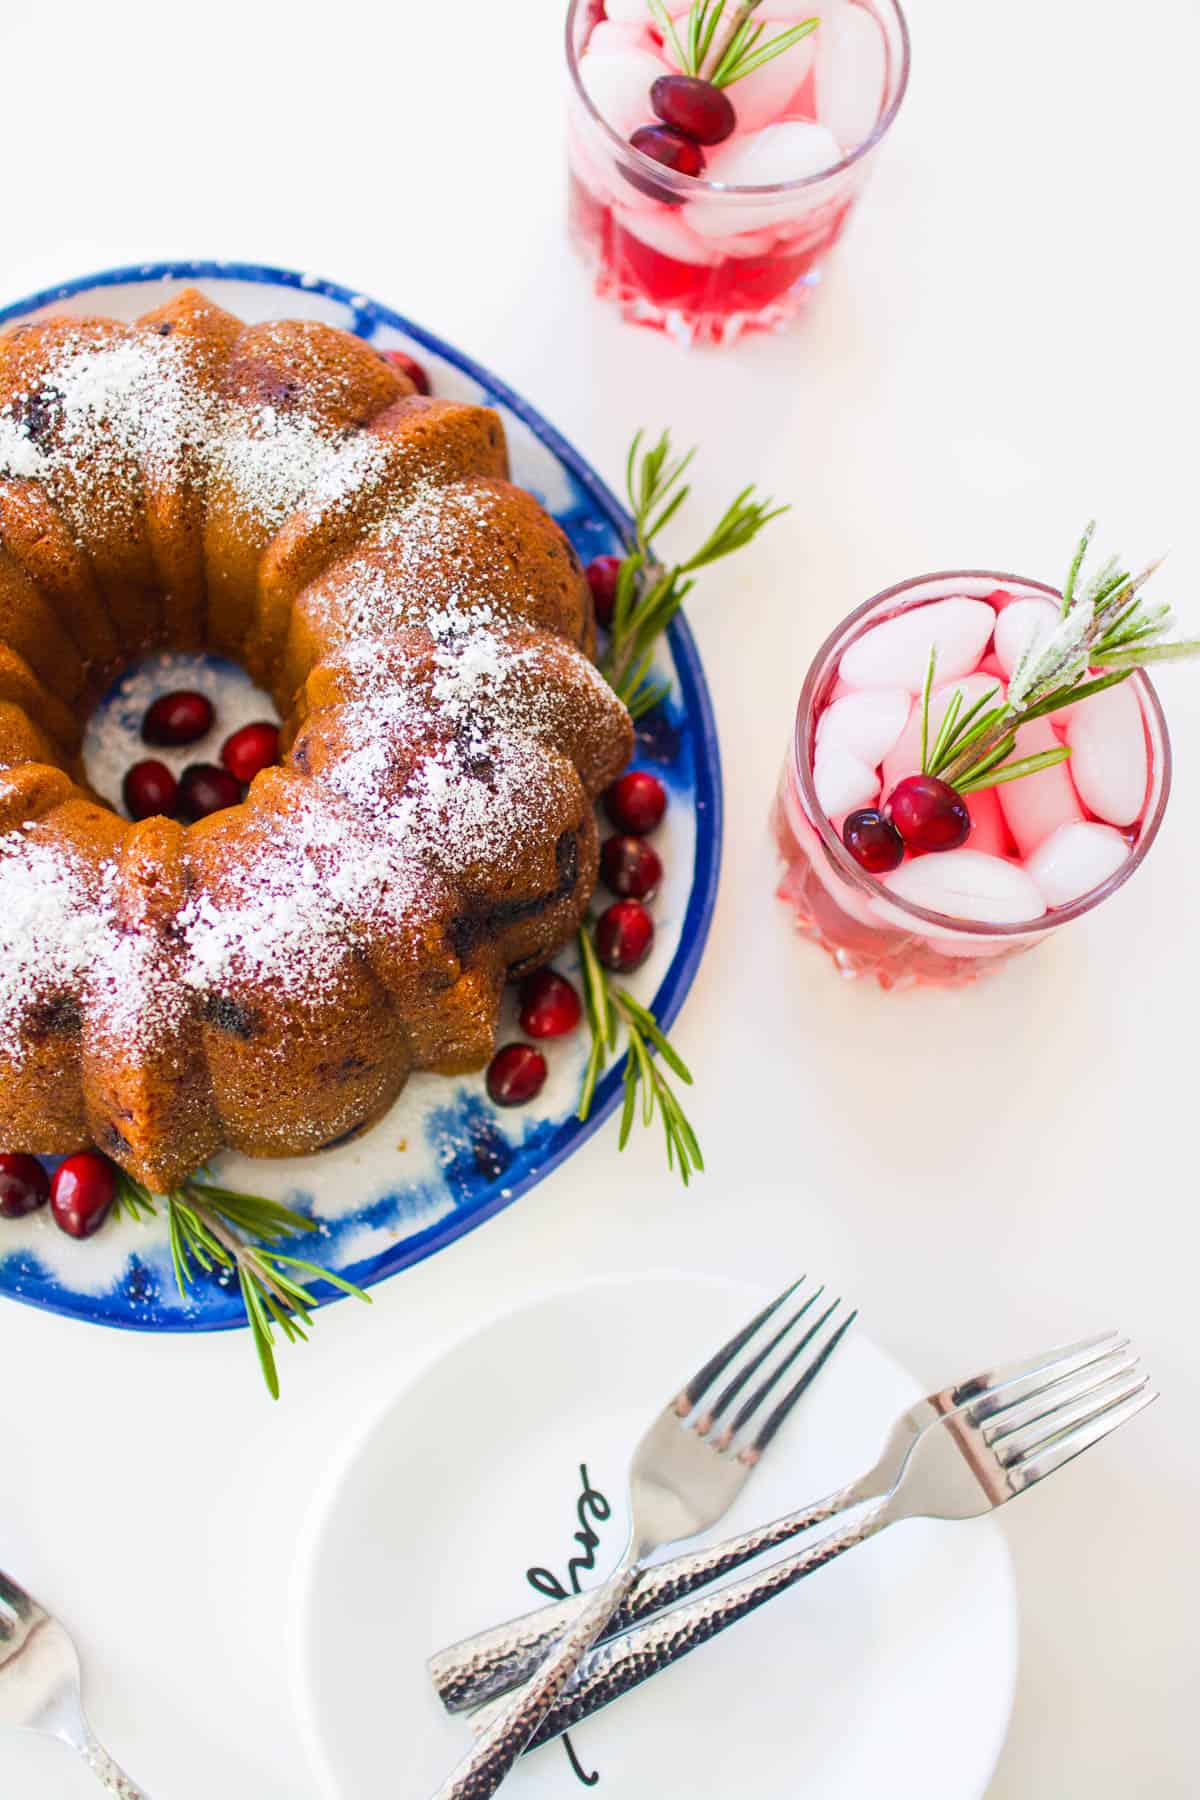 Overhead view of a bundt cake topped with powdered sugar next to cranberry vodka in glasses.